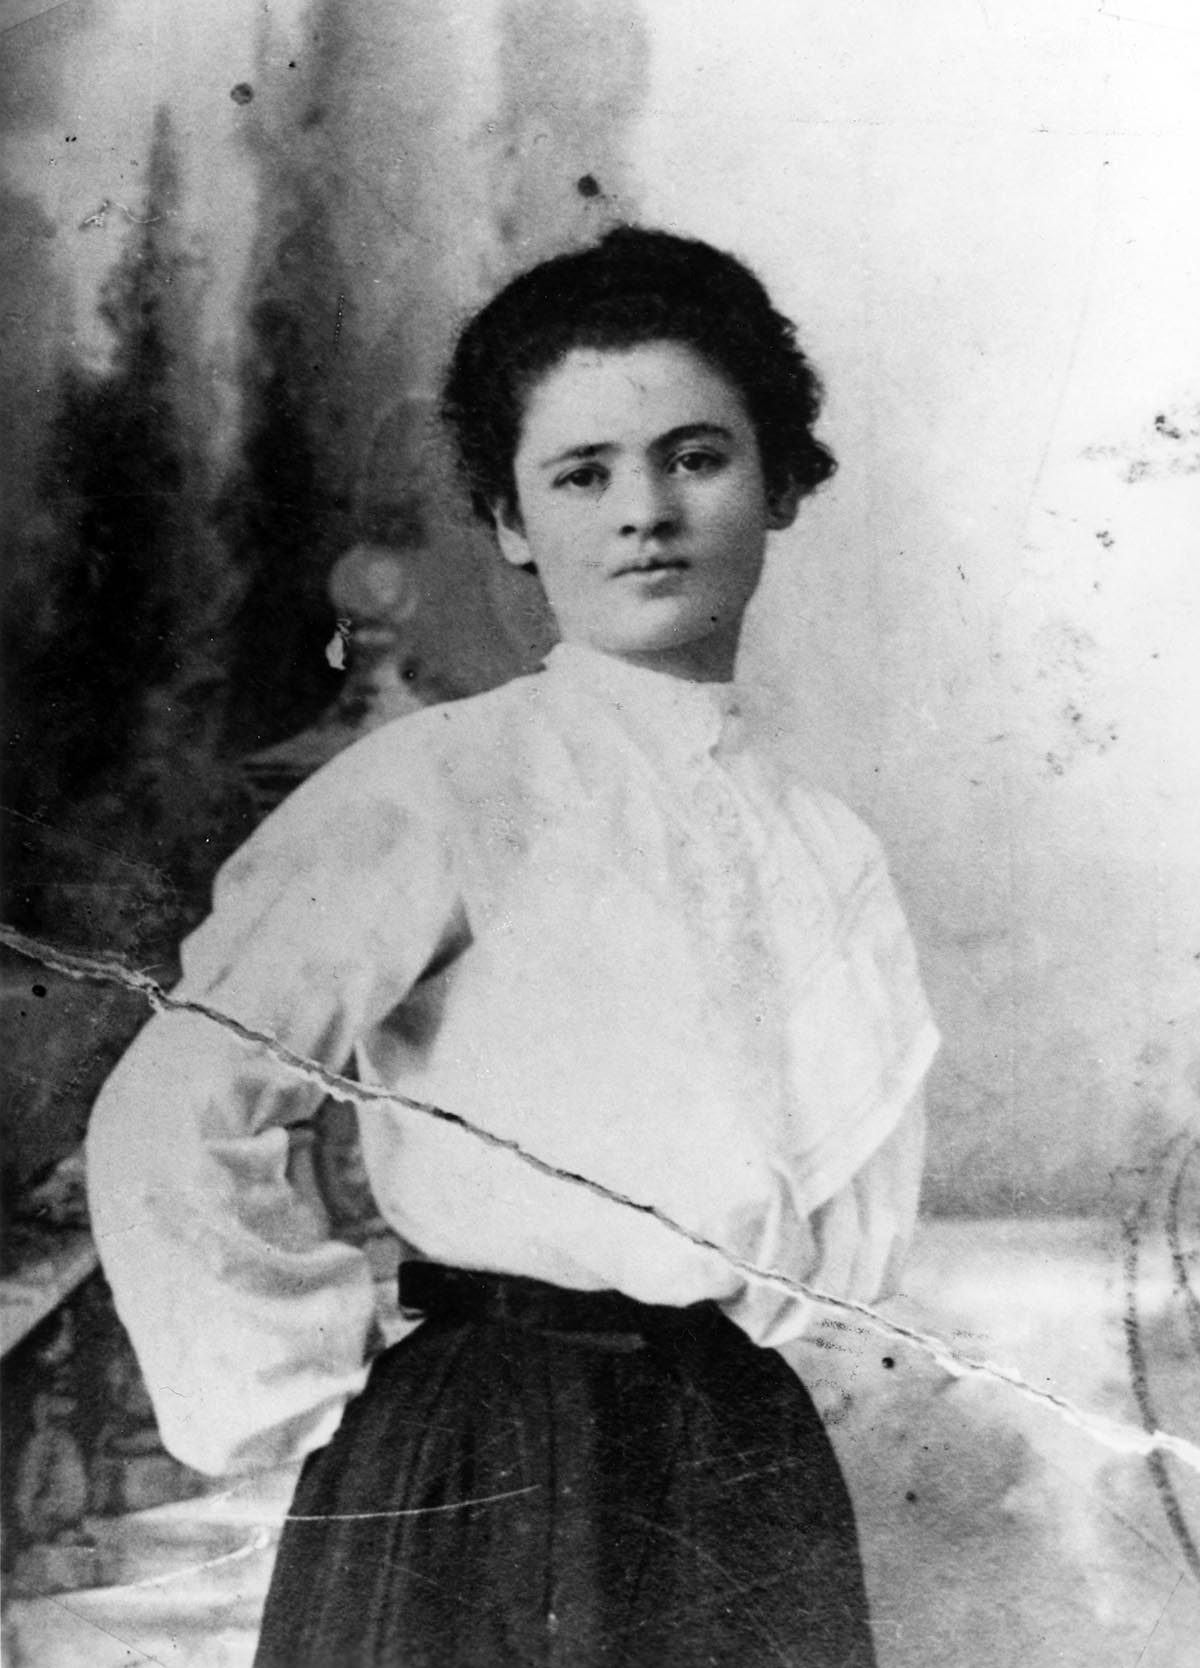 A portrait of Clara Lemlich in her mid-20s. She is standing with her hands behind her back, wearing a light colored blouse and dark colored skirt. Her hair is pulled back. 